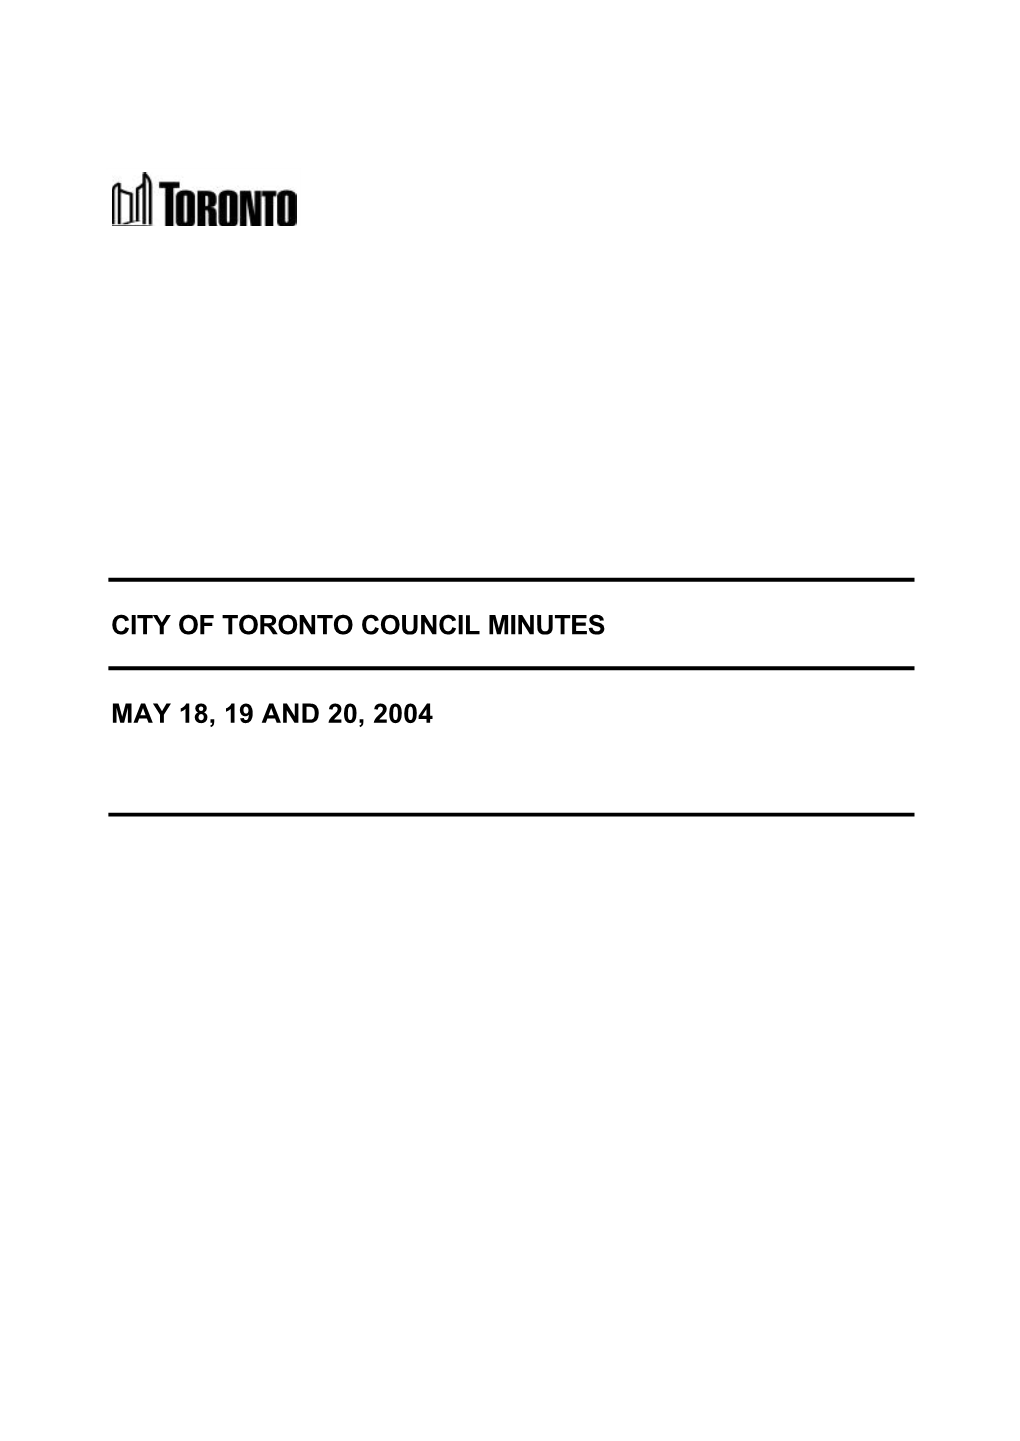 City of Toronto Council Minutes May 18, 19 and 20, 2004